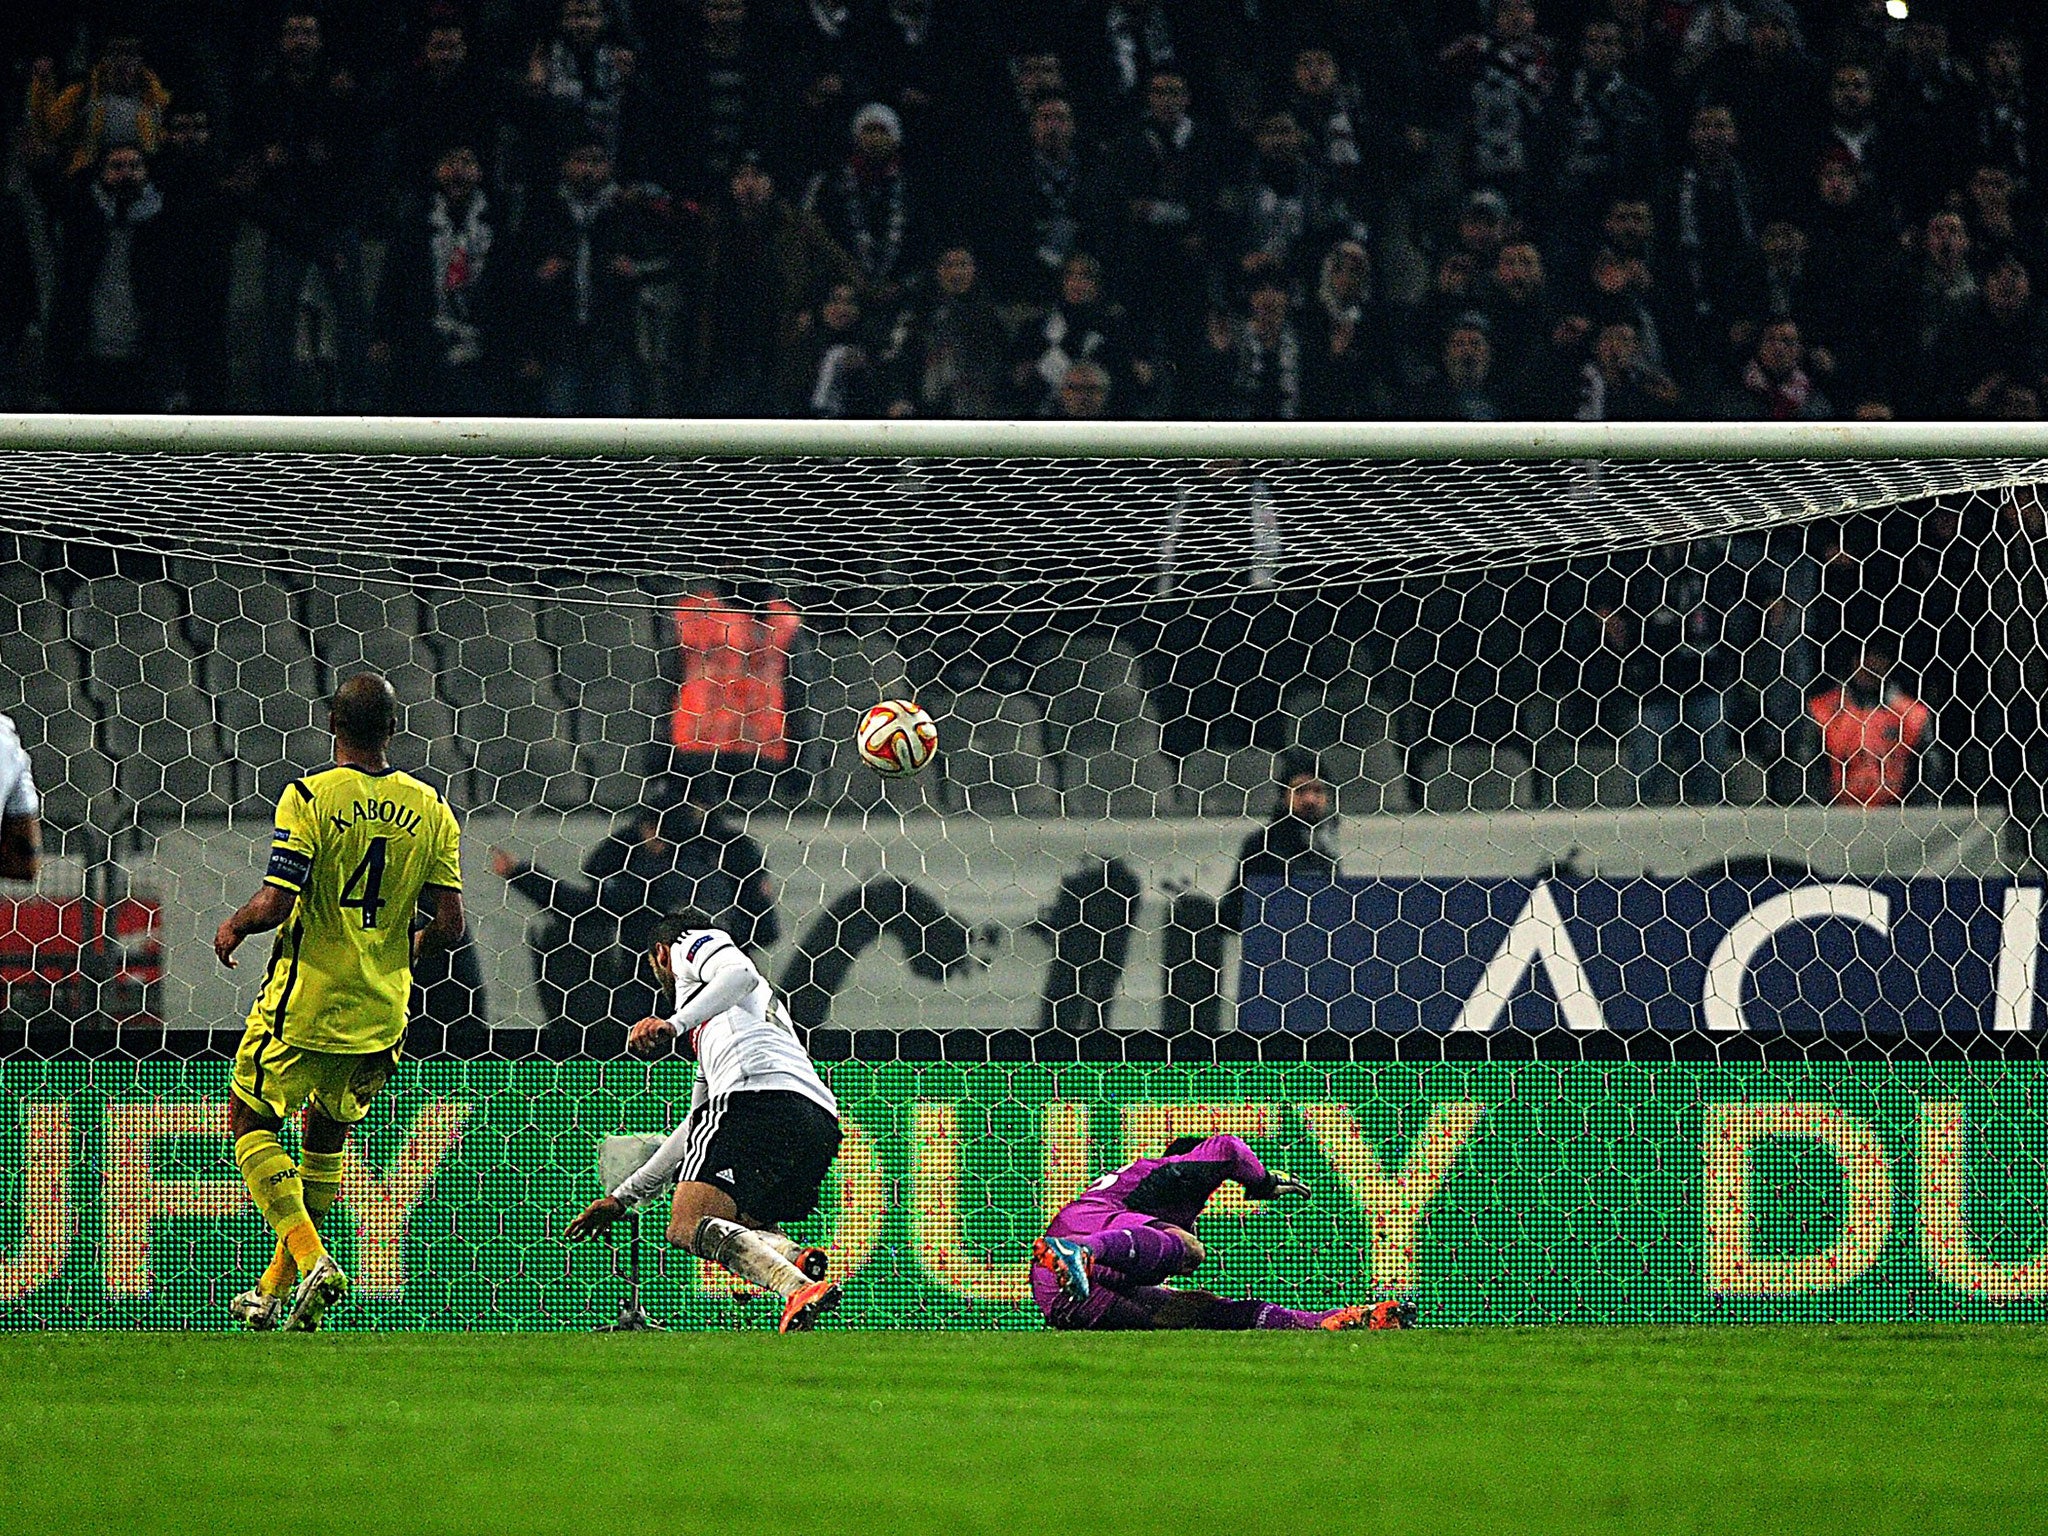 Besiktas forward Cenk Tosun scores the winning goal in the 1-0 victory over Spurs